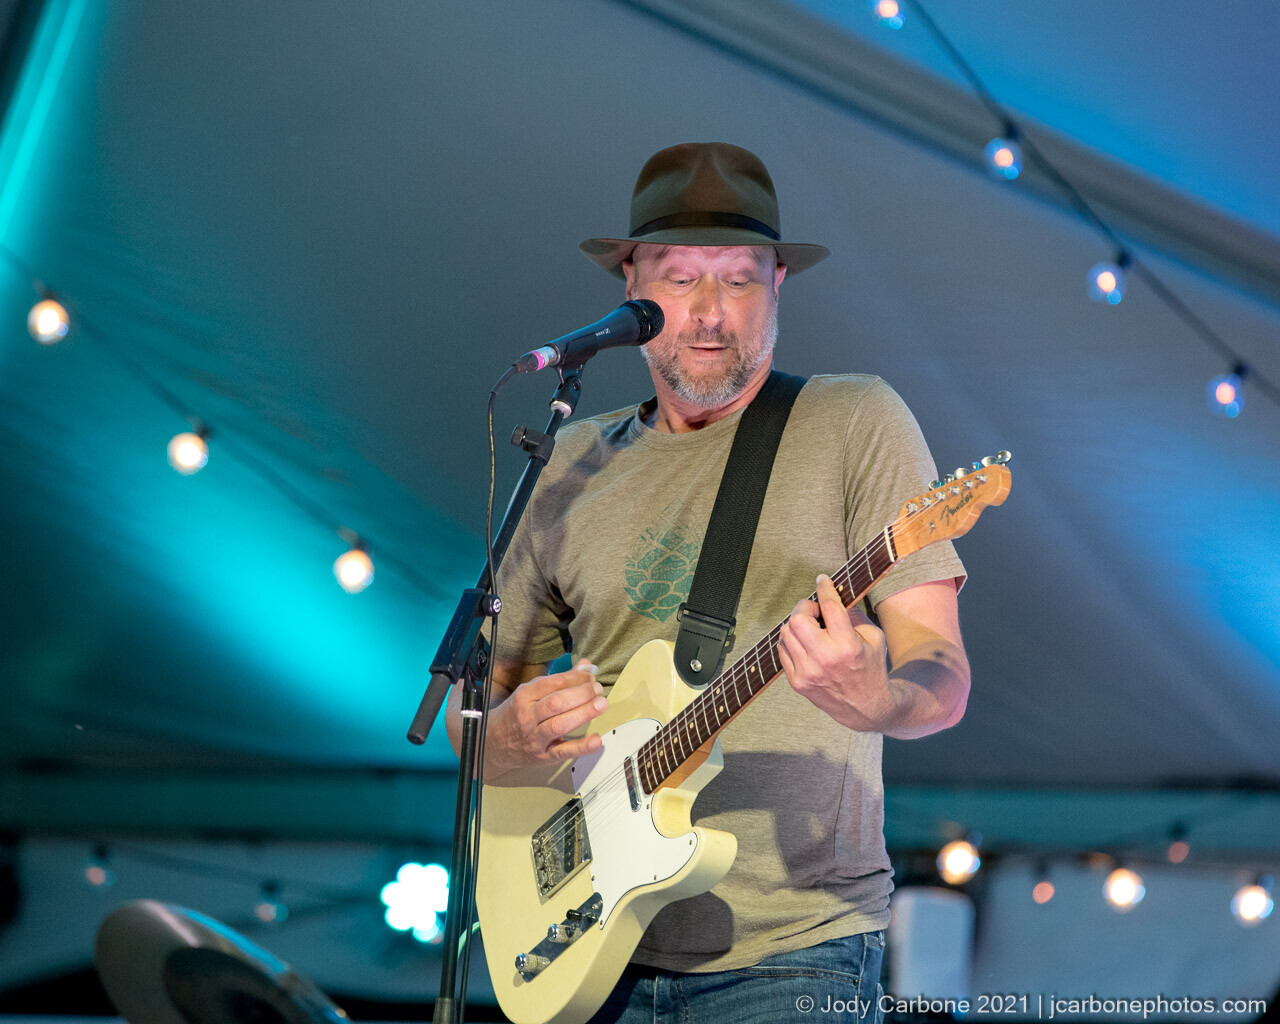 The band Everything performs onstage at The Festy Chisholm Vineyards